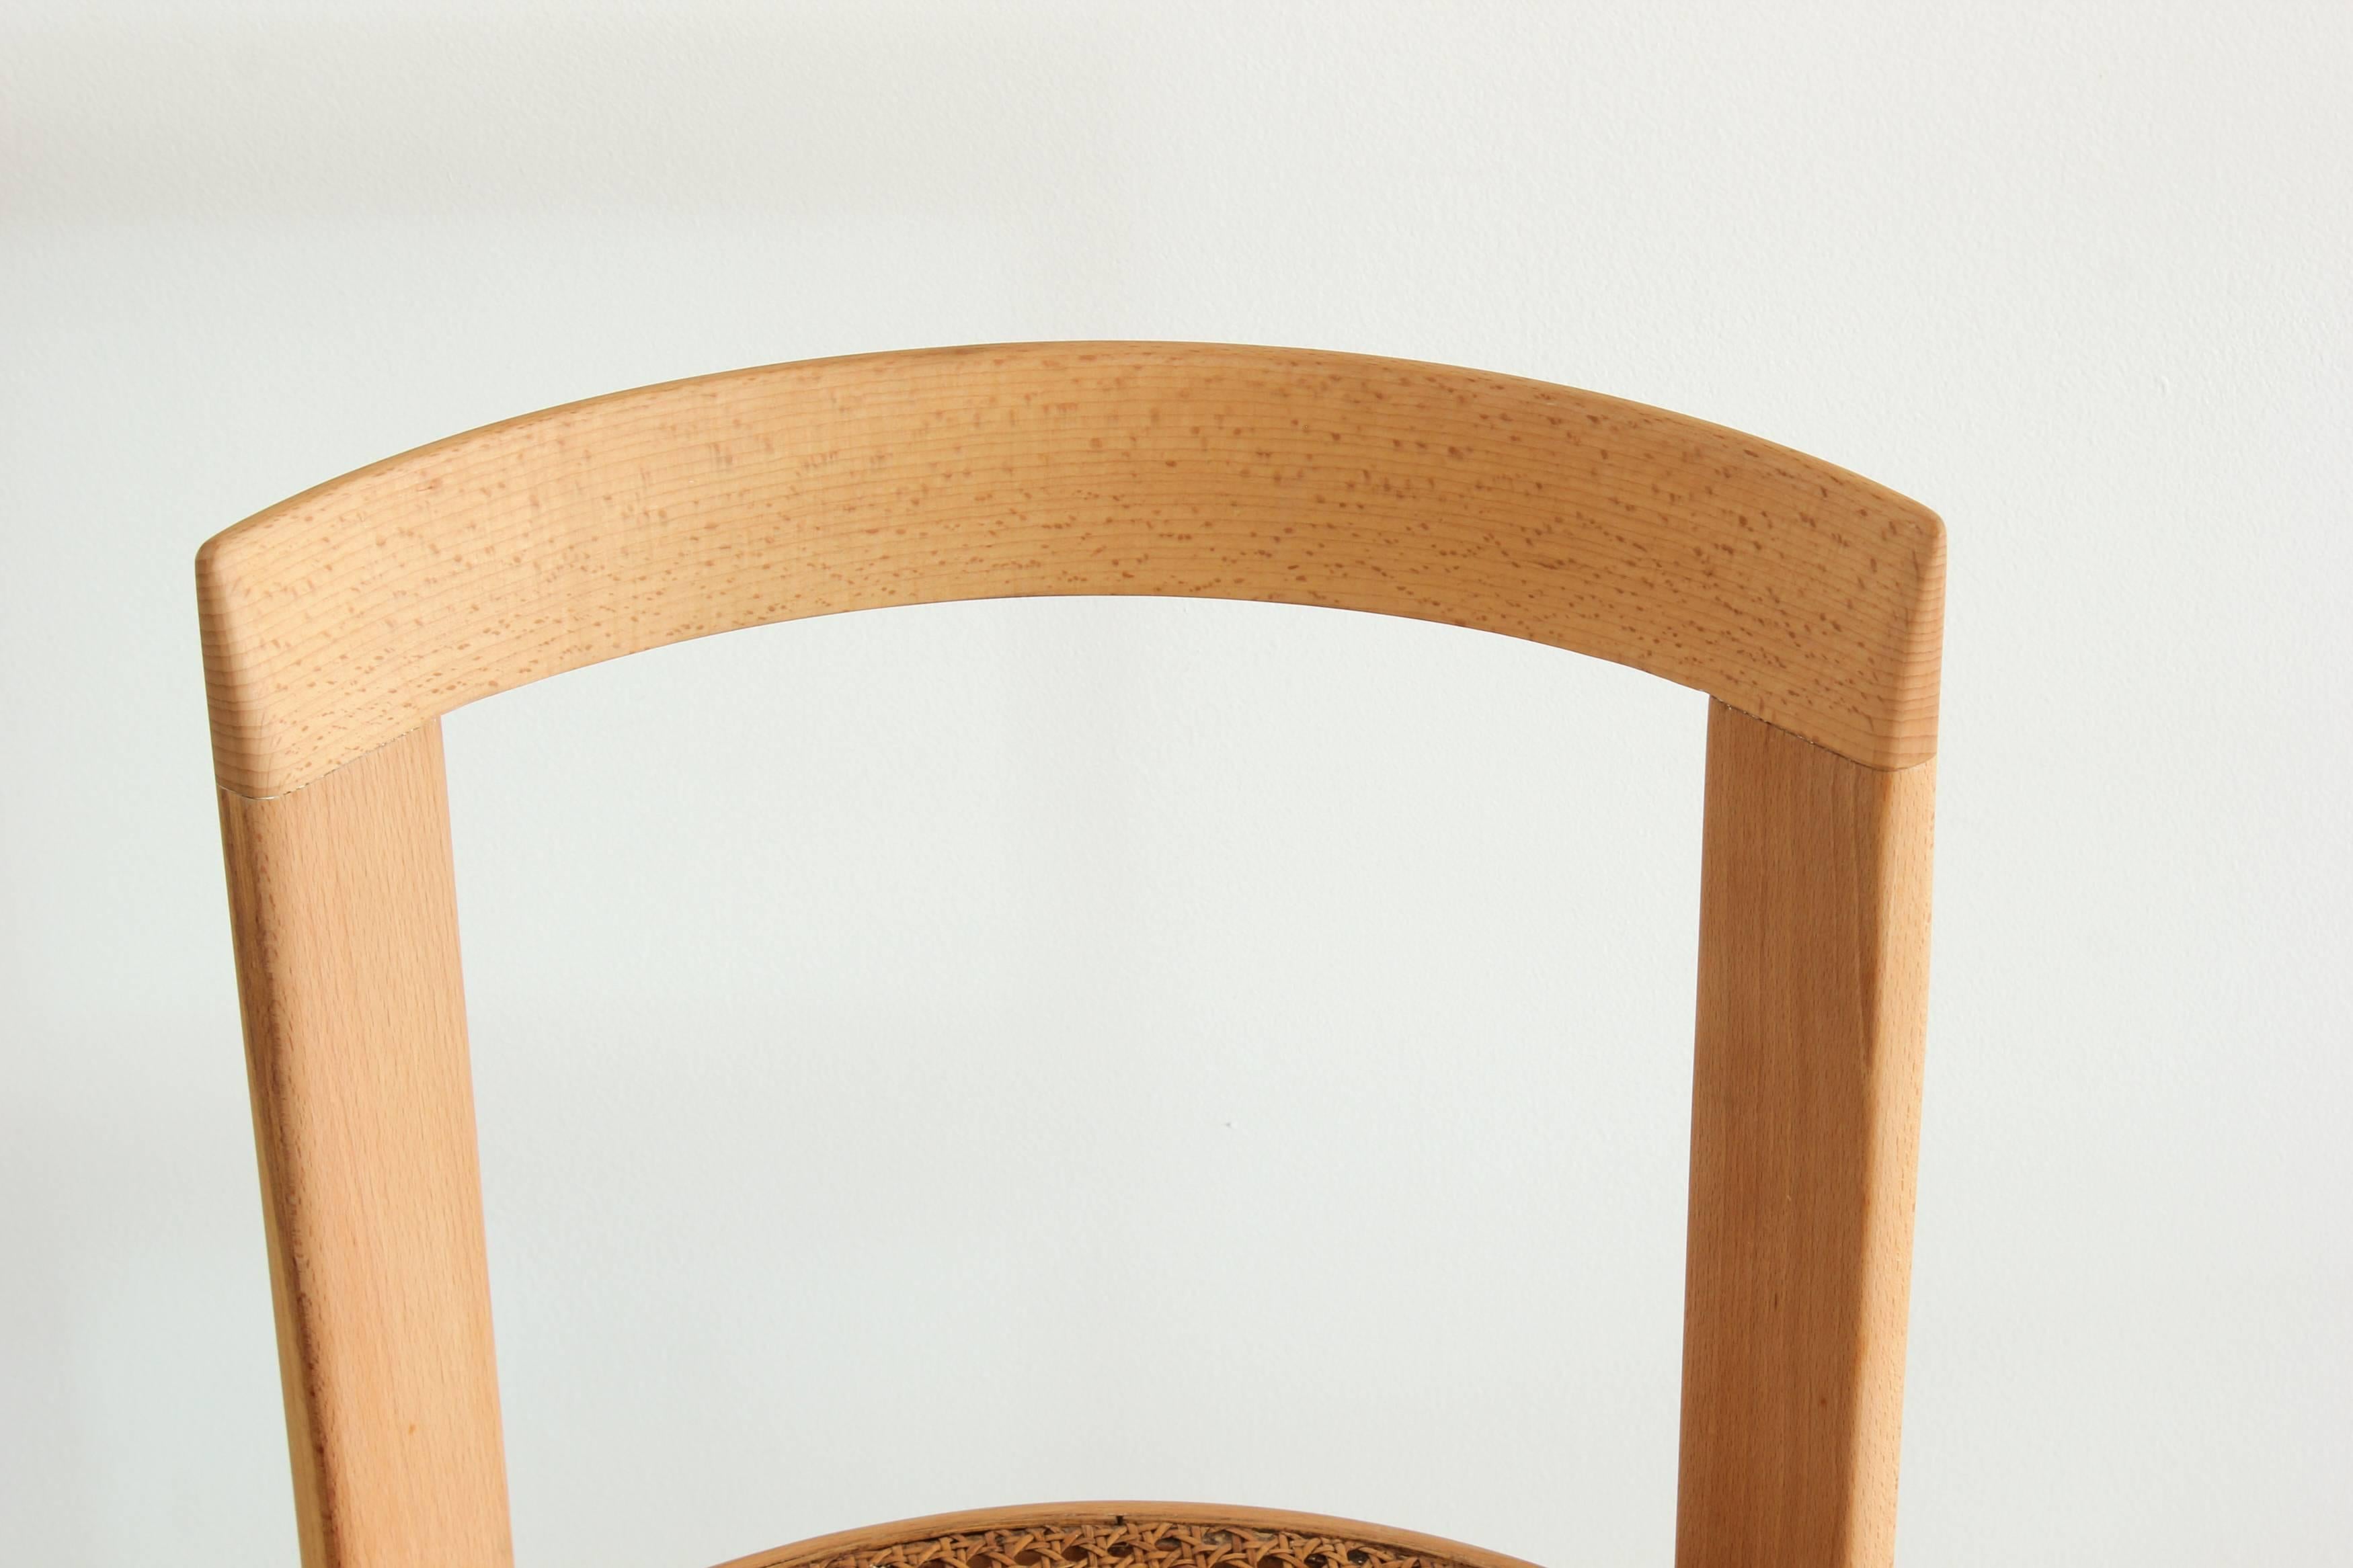 Late 20th Century Italian Bentwood Cane Chairs in Natural Beech